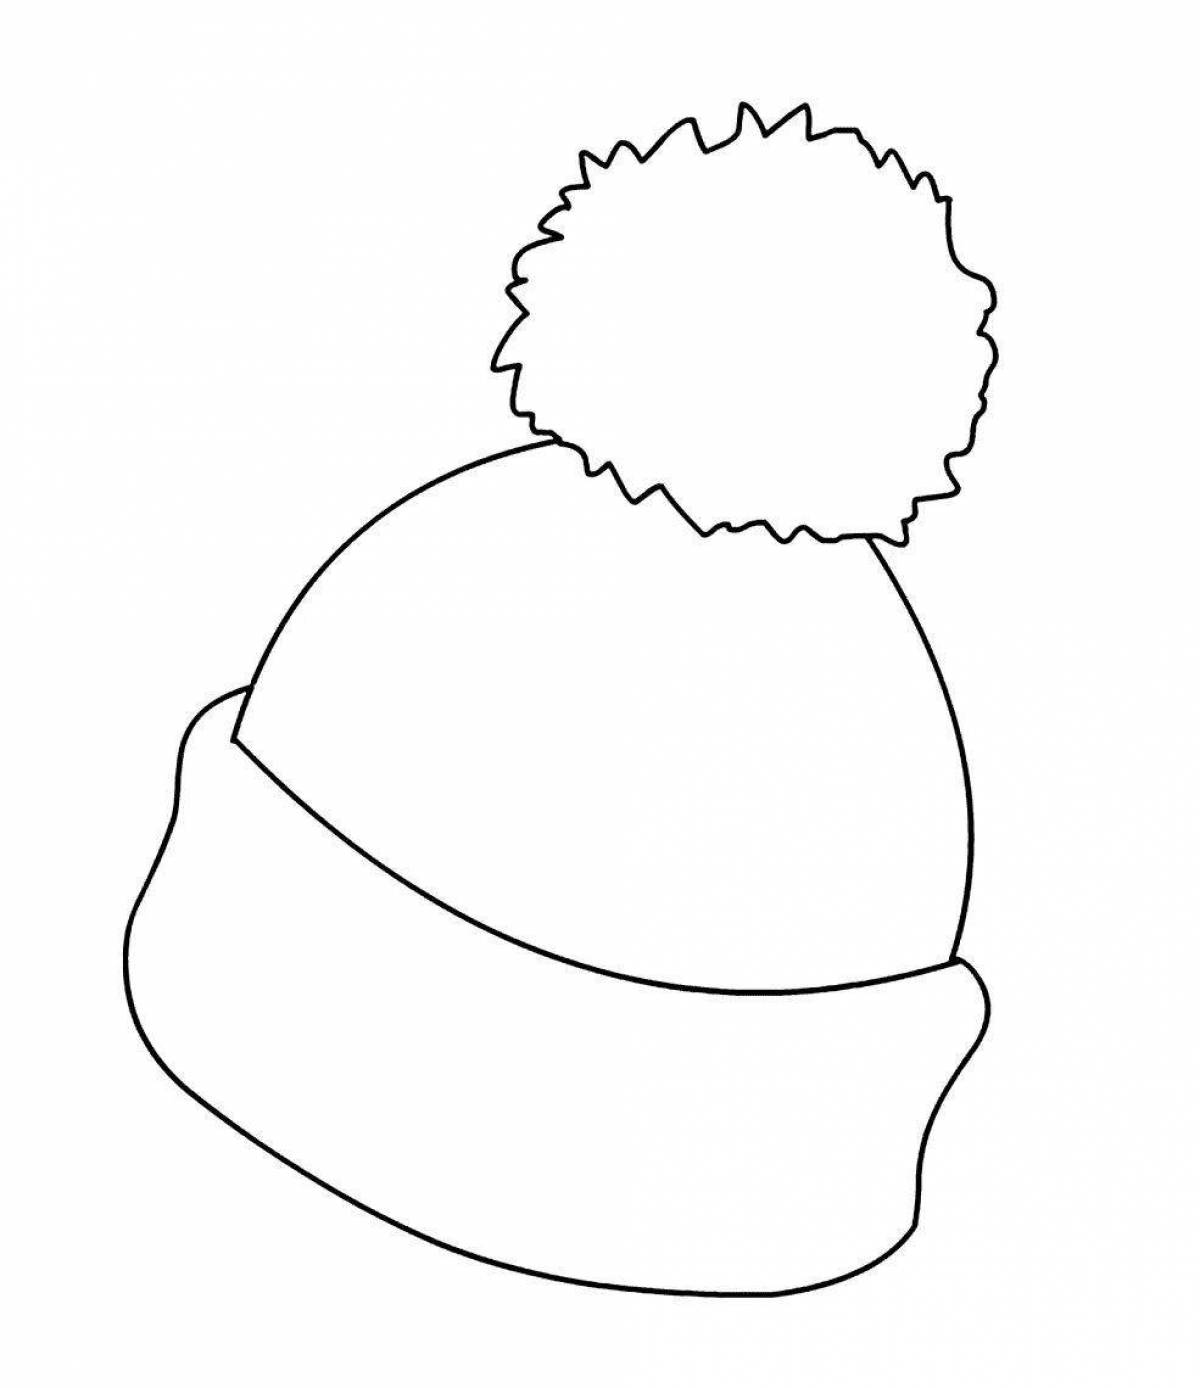 Coloured winter hat coloring book